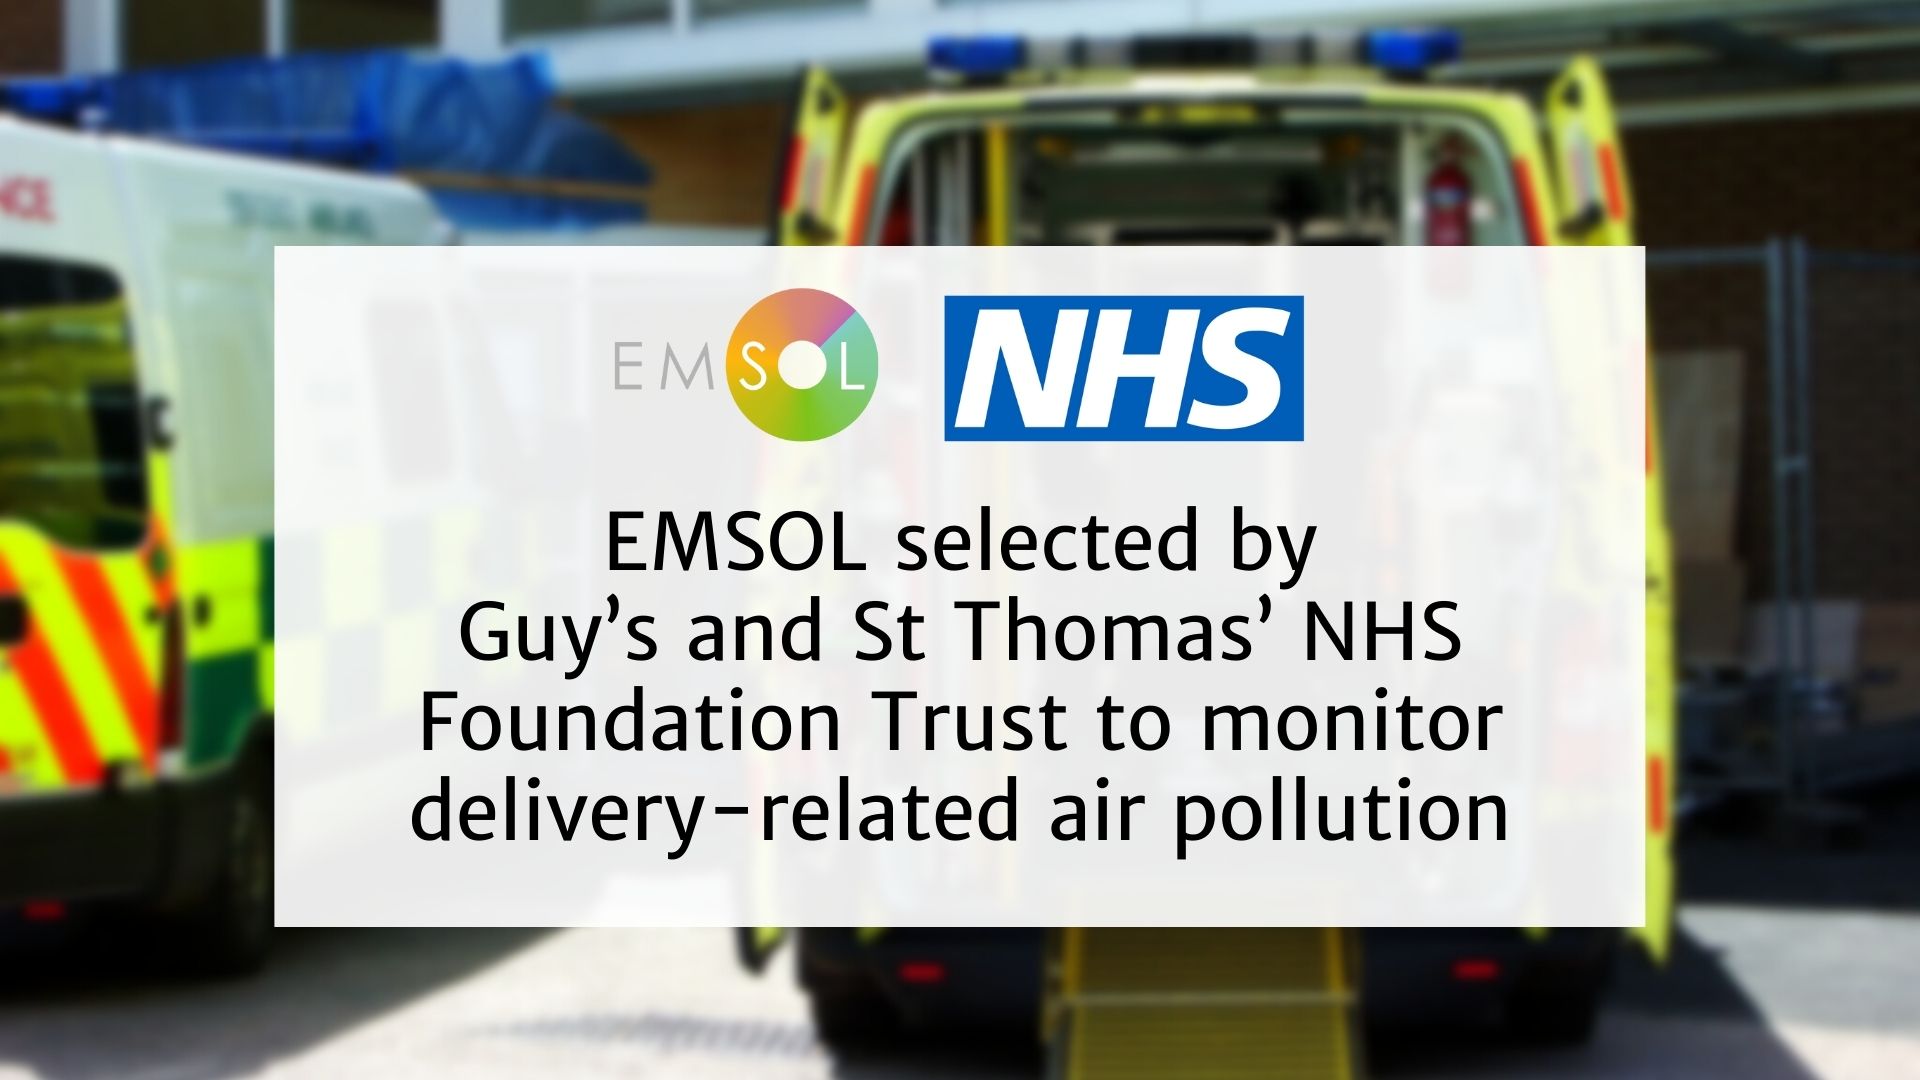 EMSOL selected by Guy’s and St Thomas’ NHS Foundation Trust as part of the TfL Freight Lab trials to monitor delivery-related air pollution